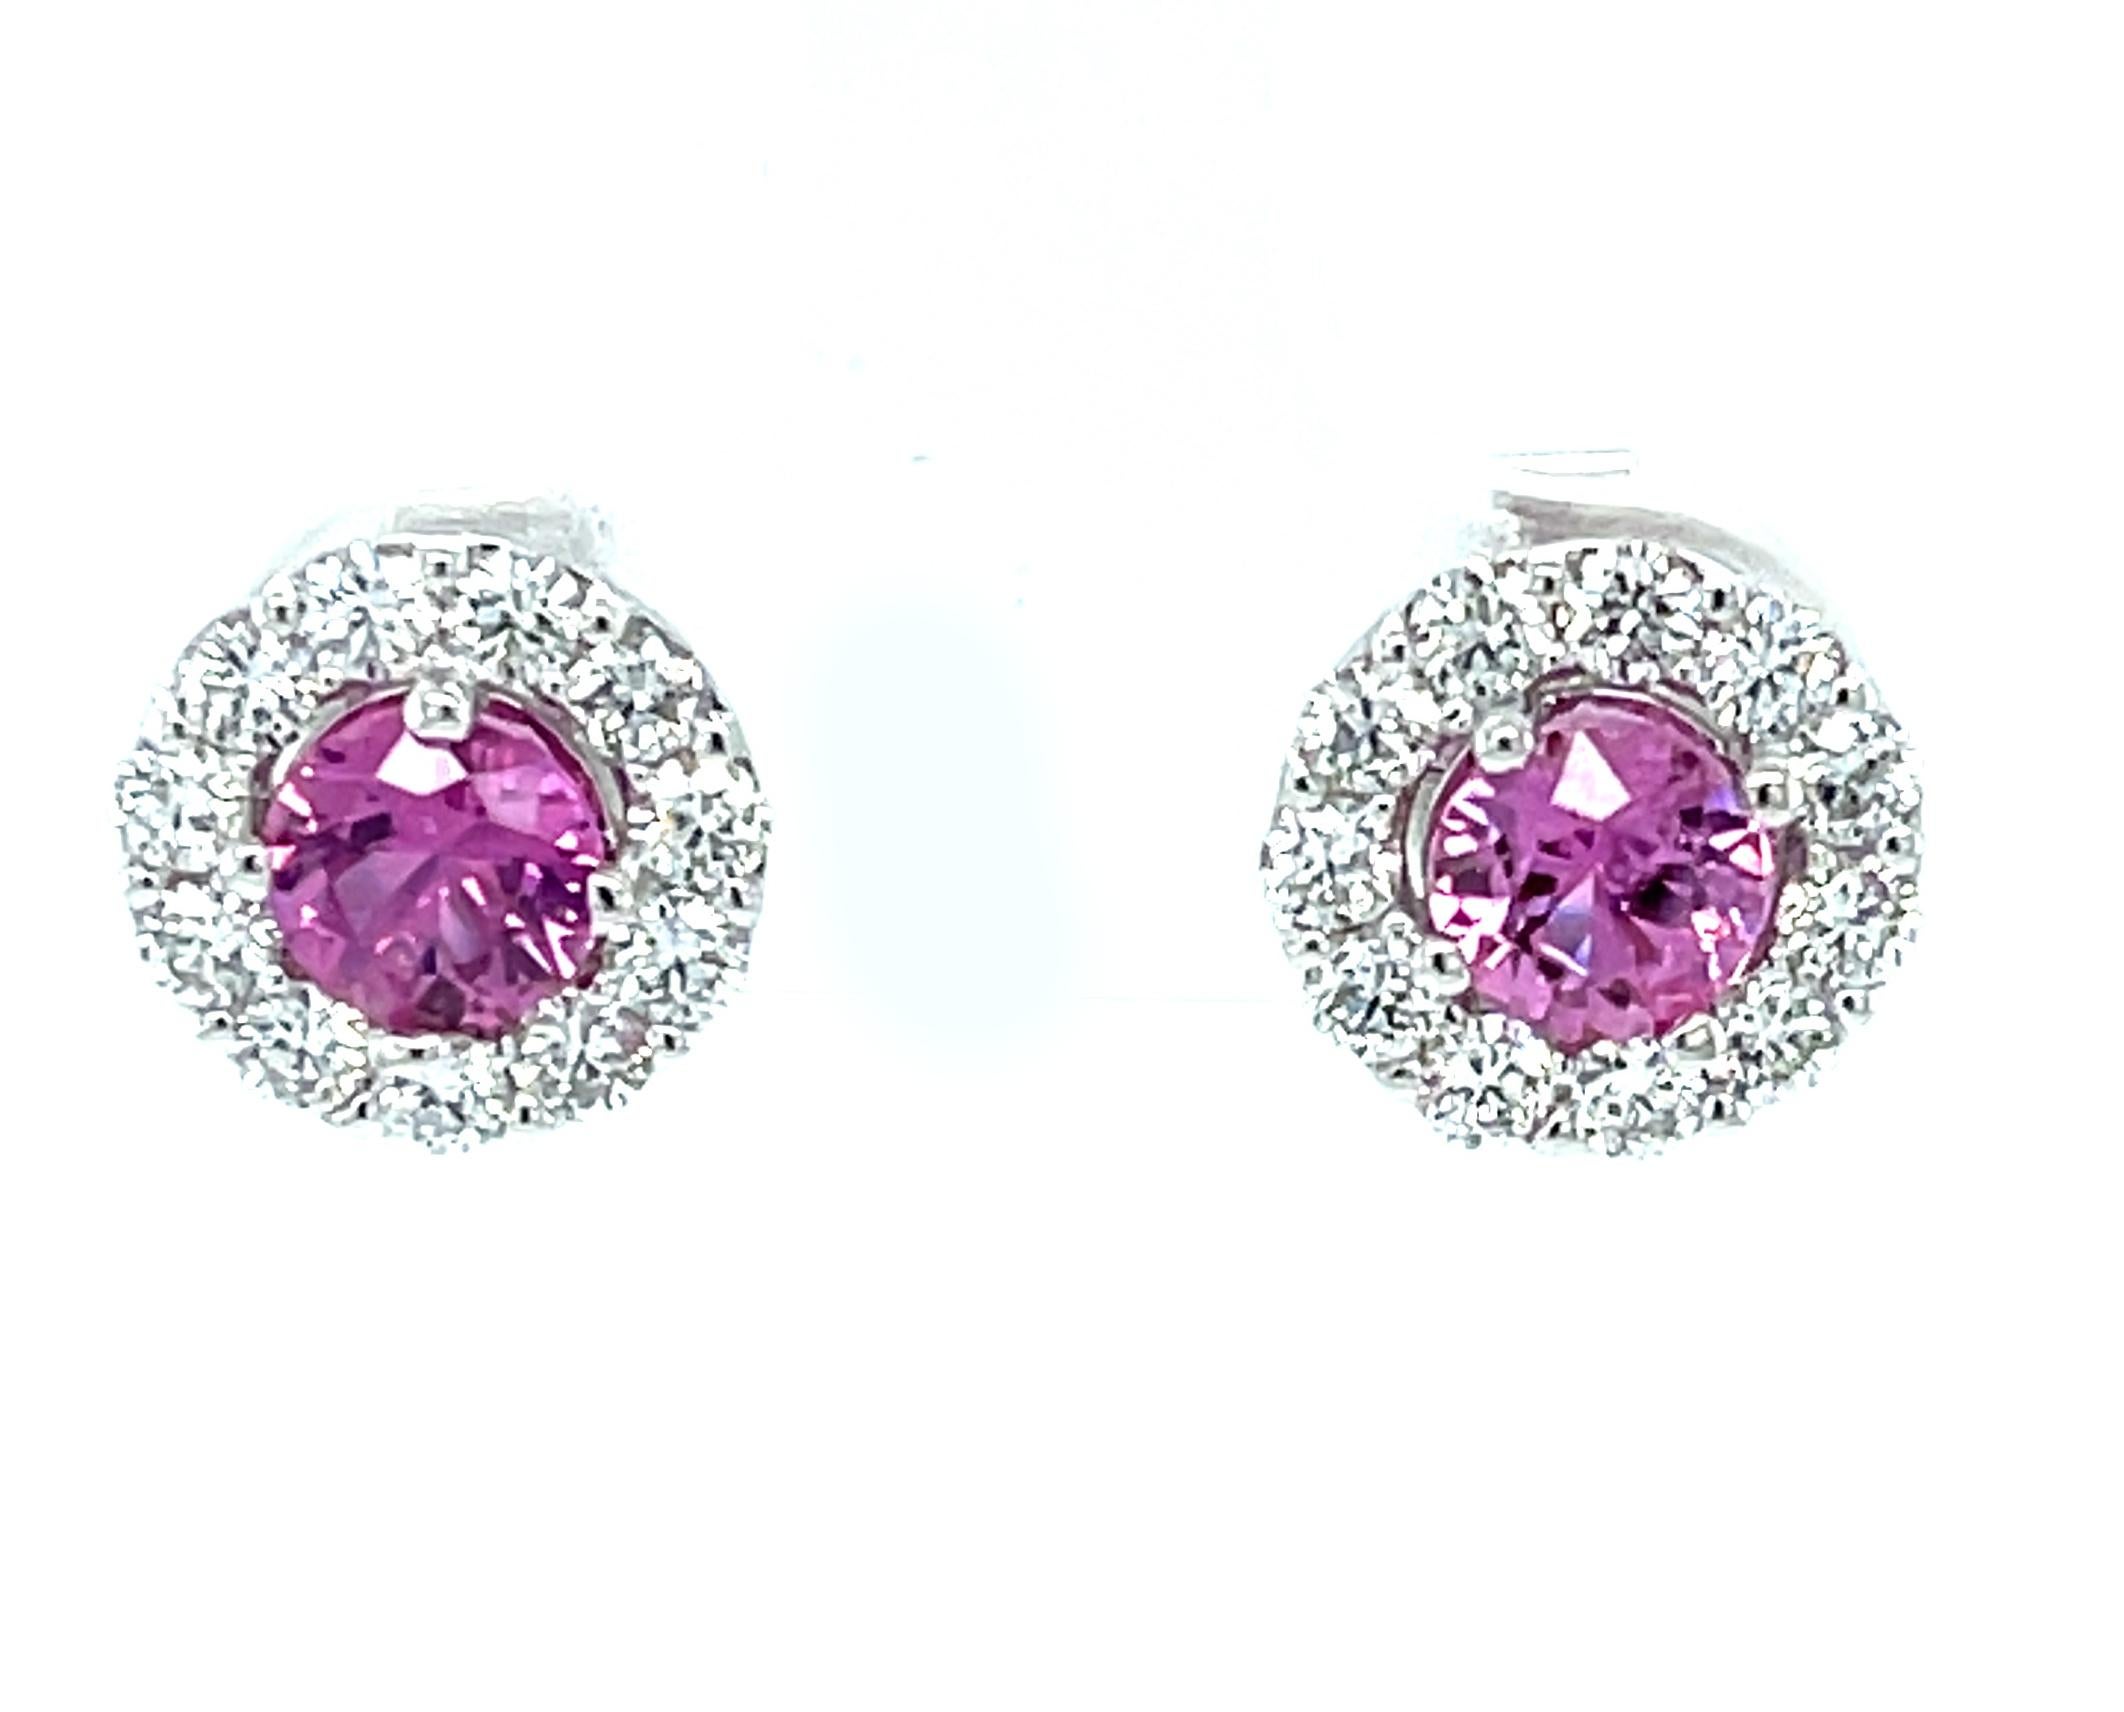 These gorgeous pink sapphire earrings feature a beautifully matched pair of vibrant pink sapphires framed by a sparkling halo of brilliant white diamonds! Set in 18k white gold, these stud earrings are the perfect complement for any outfit, day or